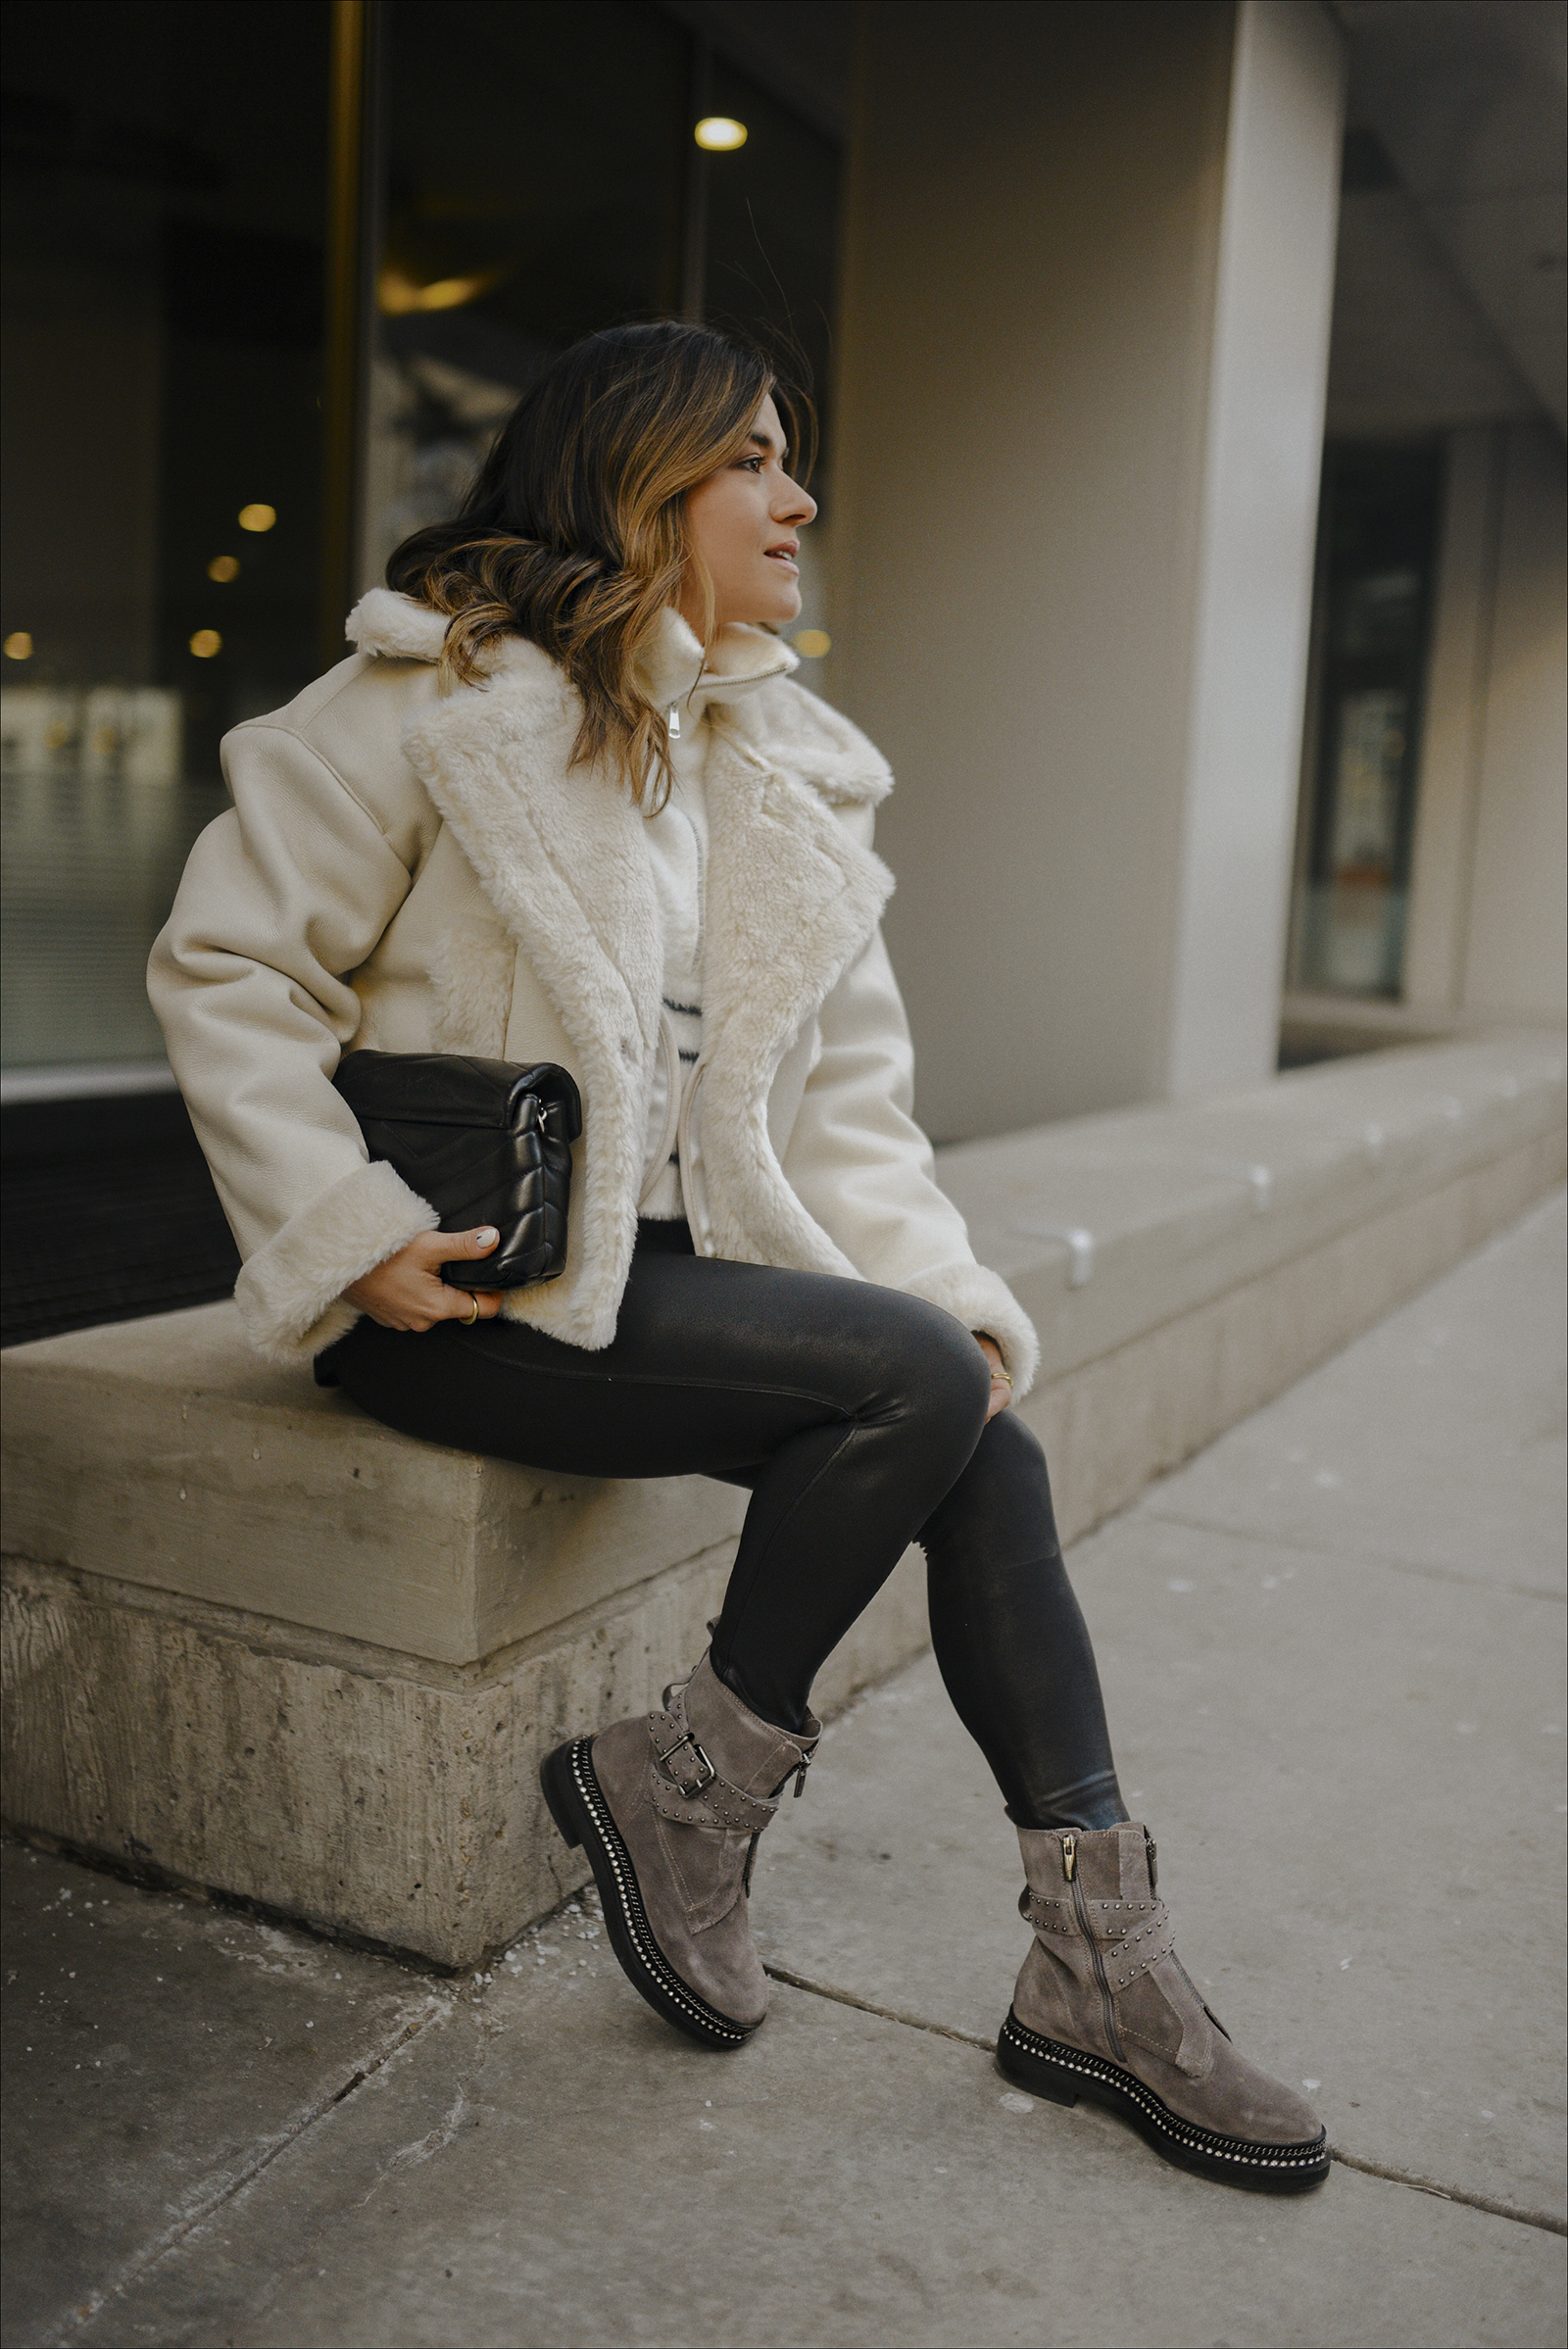 THE SHERPA LINED COAT EVERY GIRL NEEDS | CHIC TALK | CHIC TALK